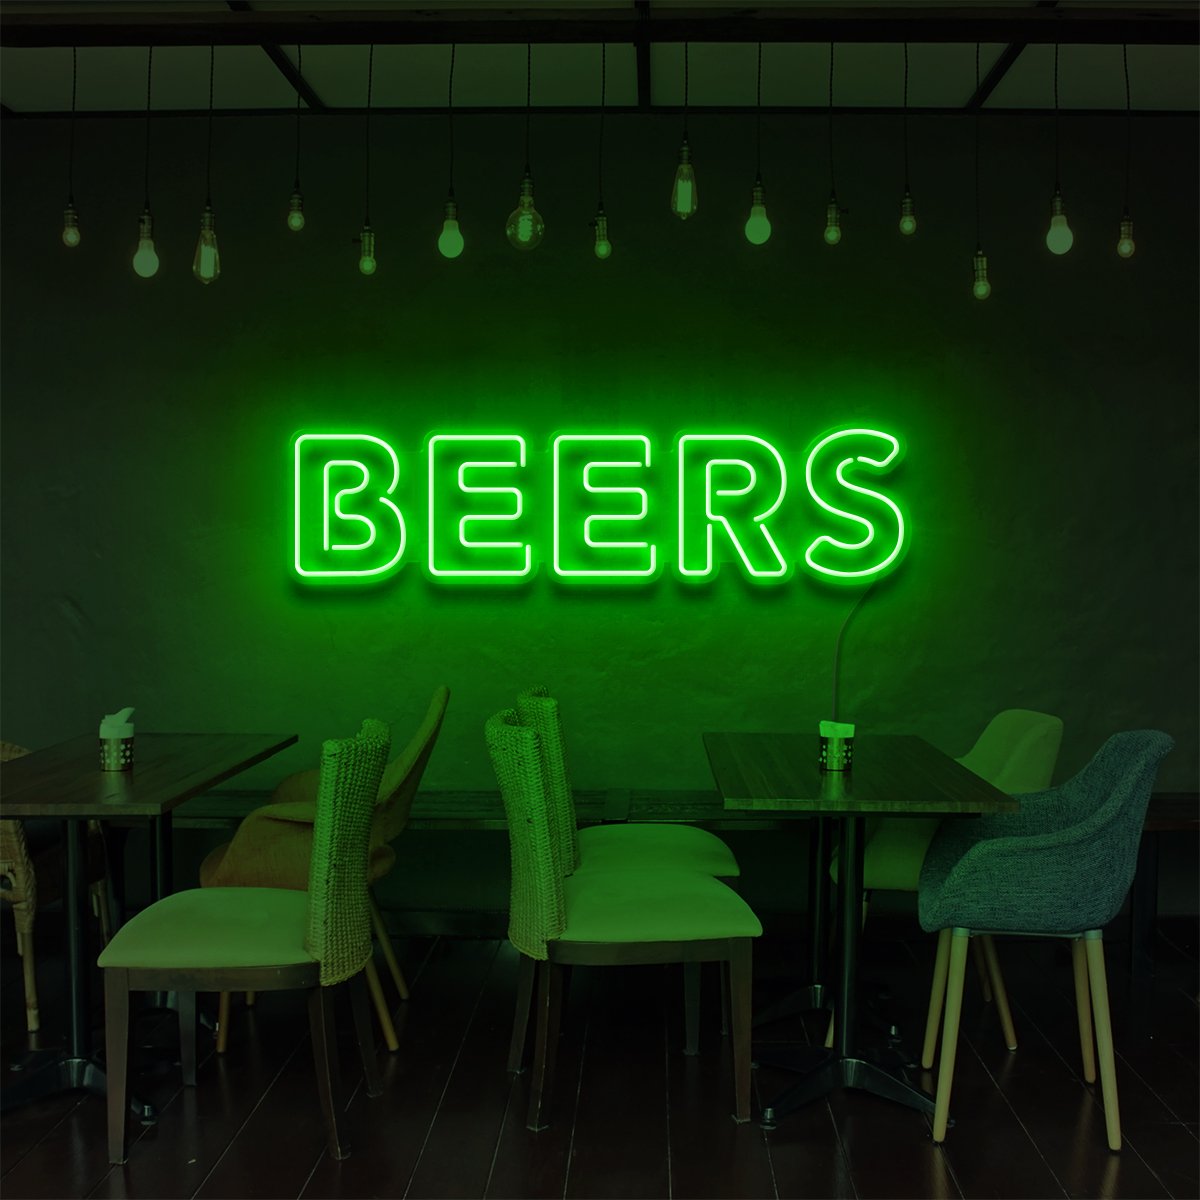 "Beers" Neon Sign for Bars & Restaurants 60cm (2ft) / Green / LED Neon by Neon Icons